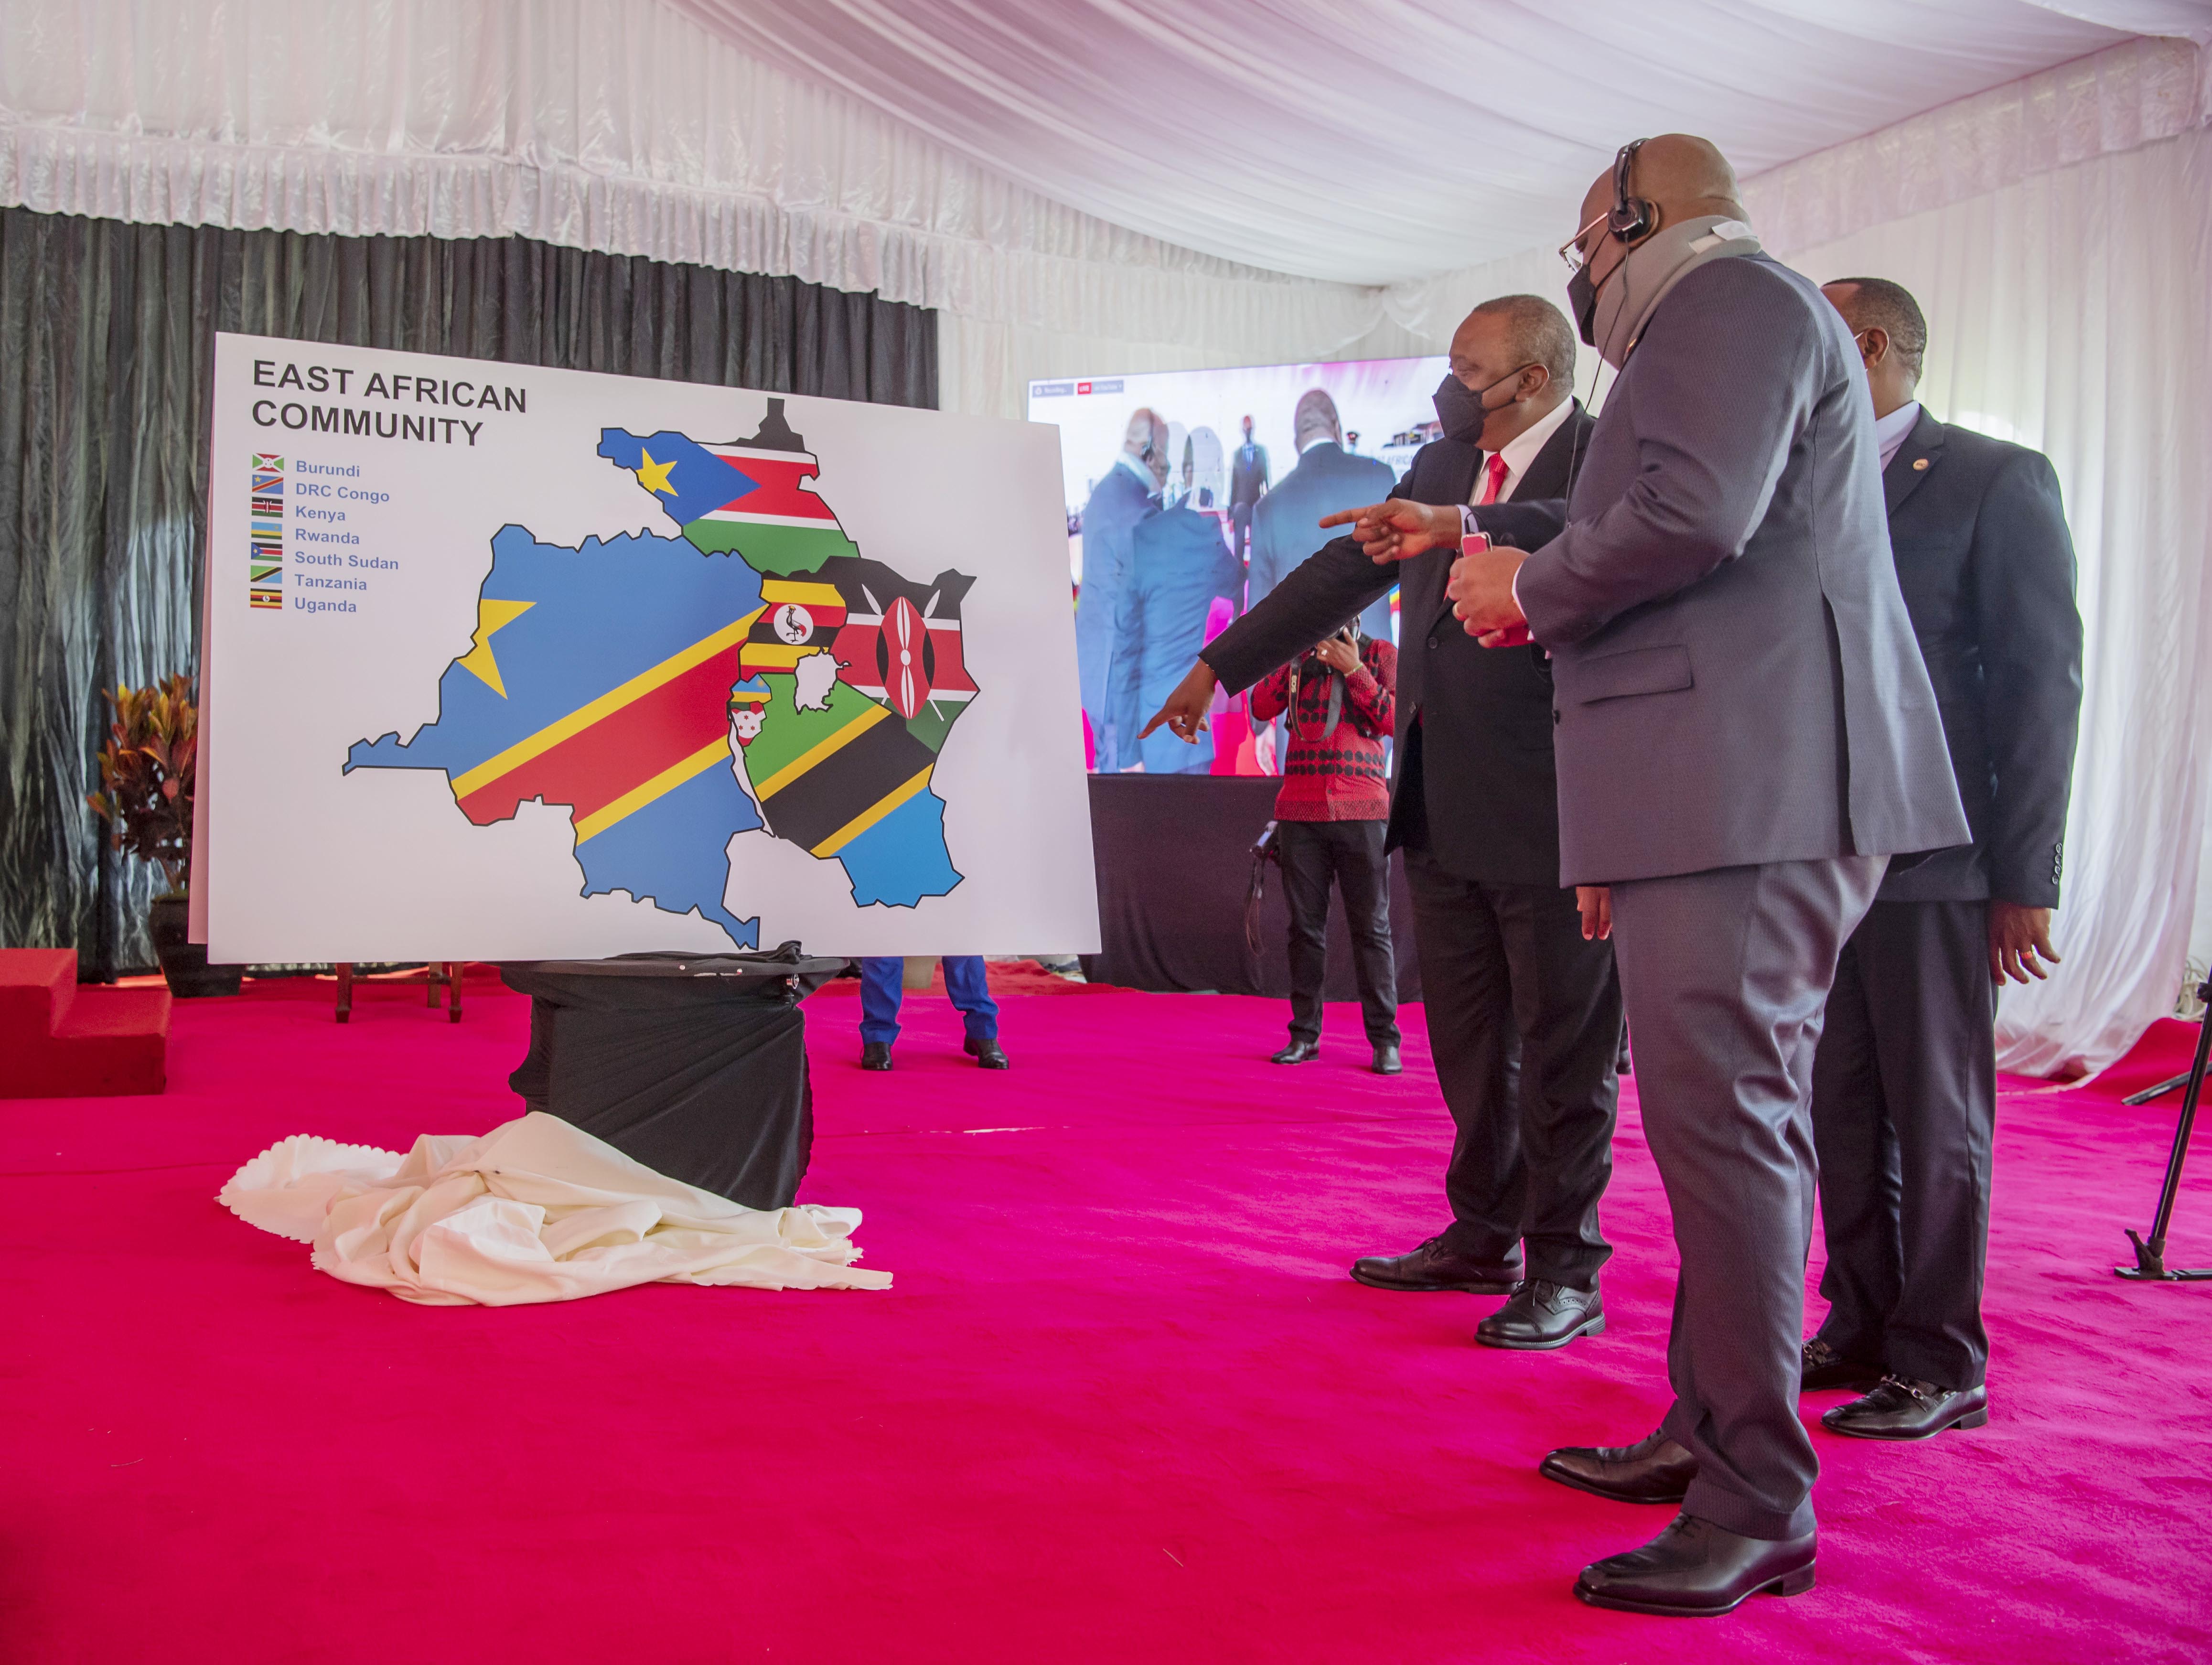 The Kenyan President Uhuru Kenyatta and DRC President Fu00e9lix Tshisekedi unveil the new map of East African Community during the Signing Ceremony of the Treaty of Accession by DRC to the East African Community. 